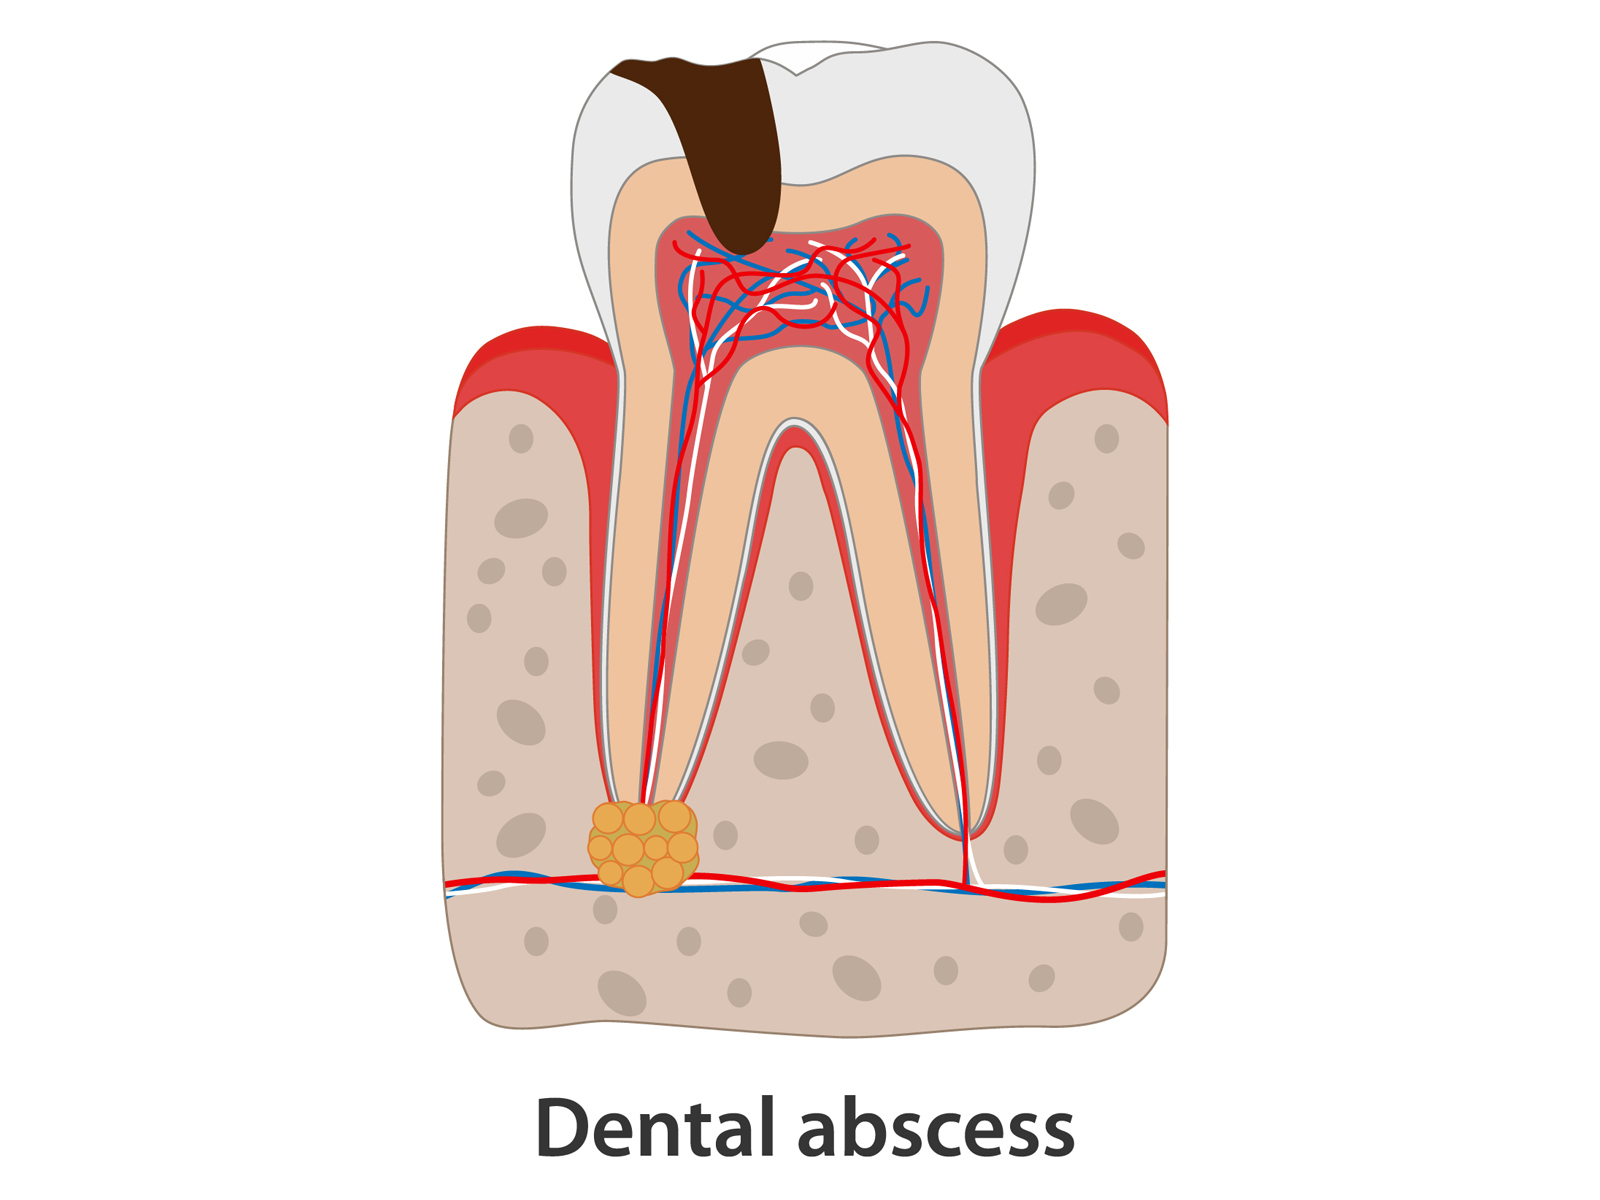 How long does it take for an abscess to drain on its own?